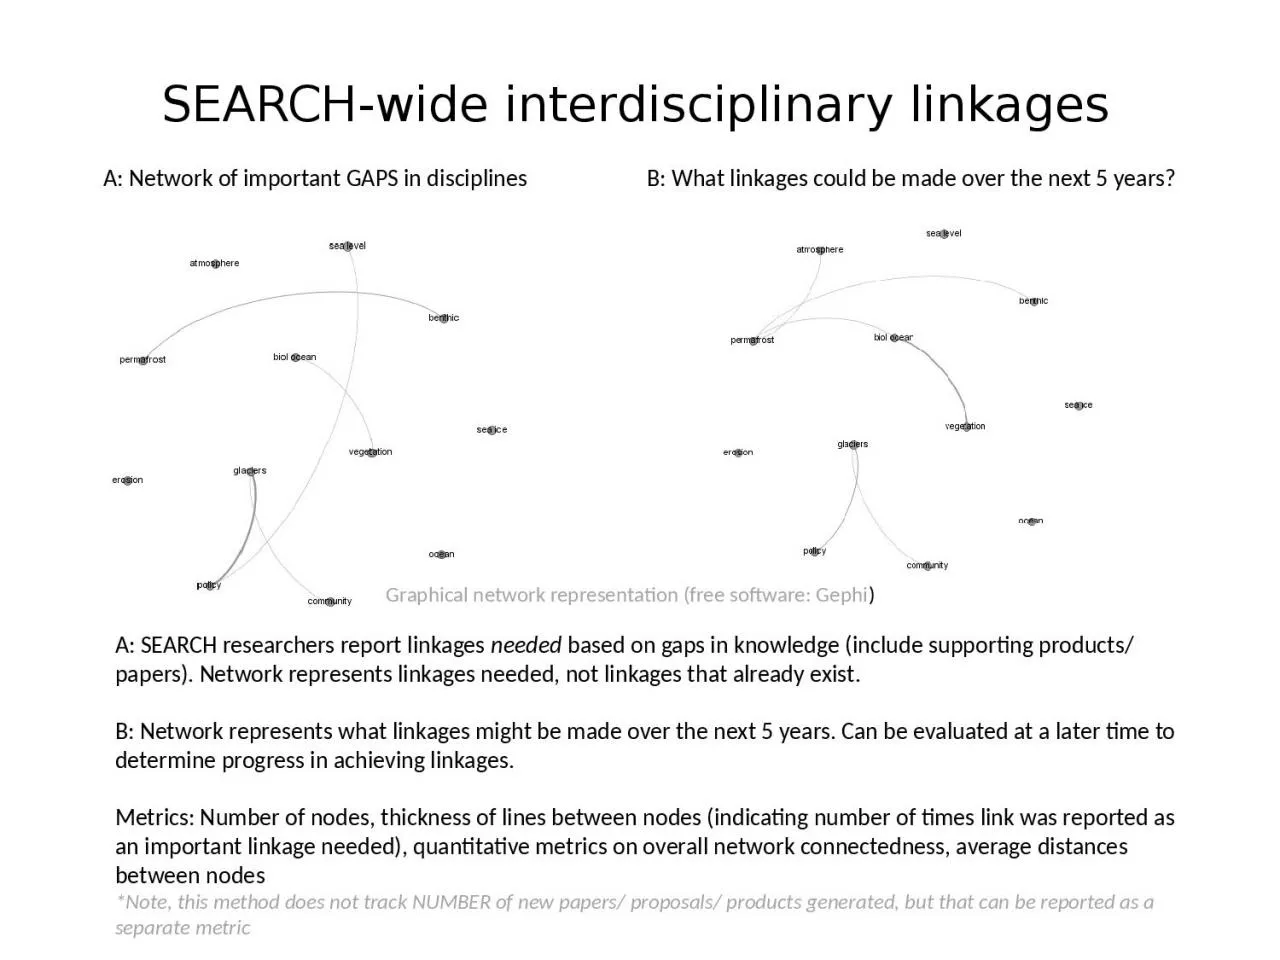 A: Network of important GAPS in disciplines